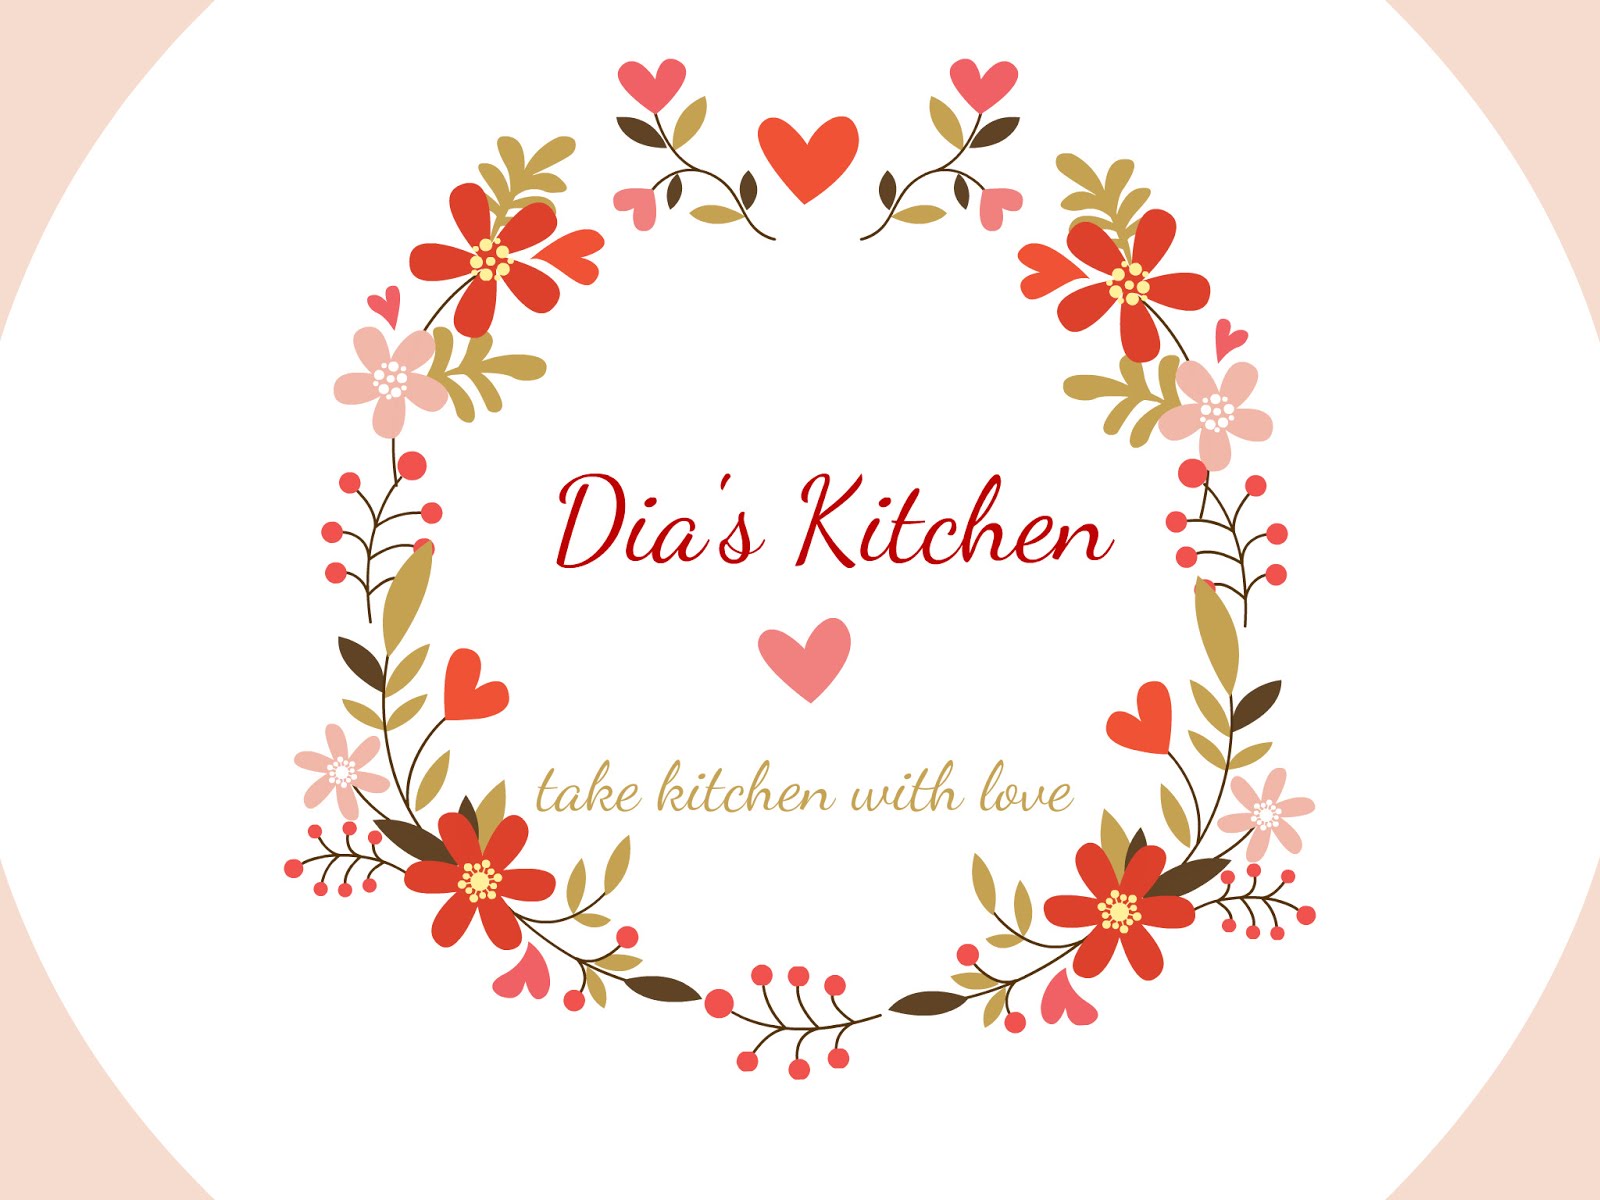 Take kitchen with love